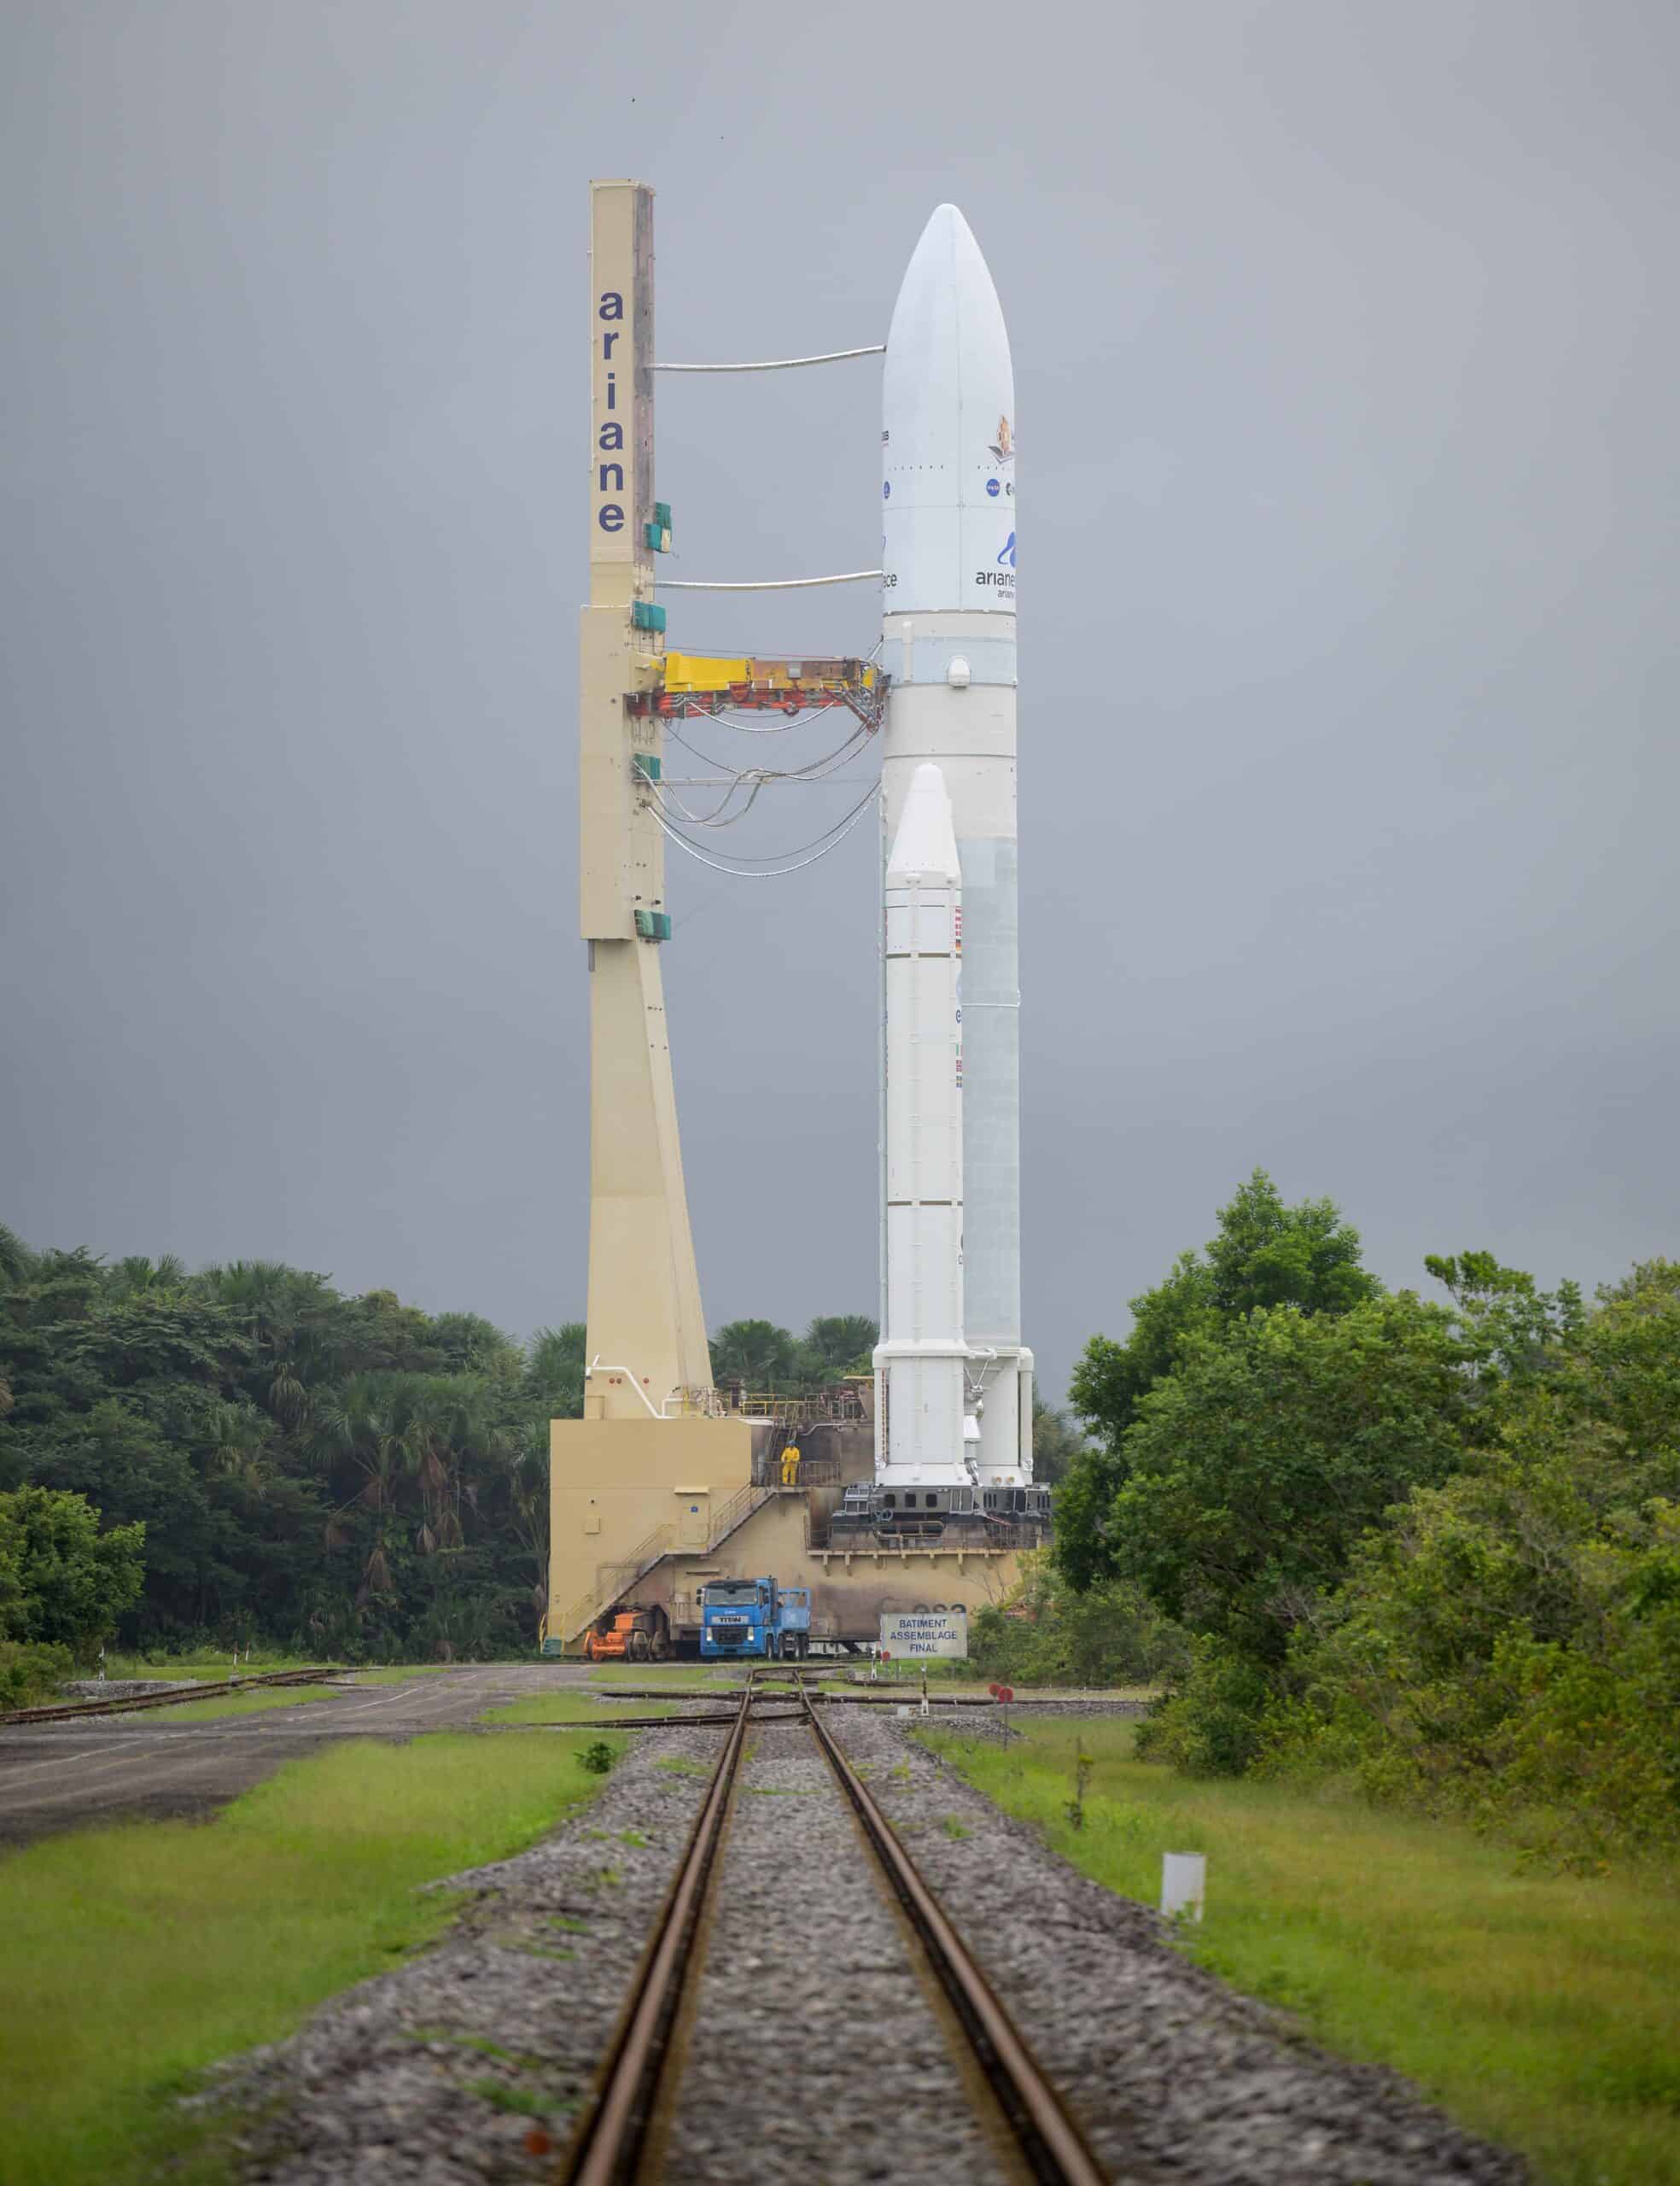 James Webb Space Telescope and Ariane 5 rollout